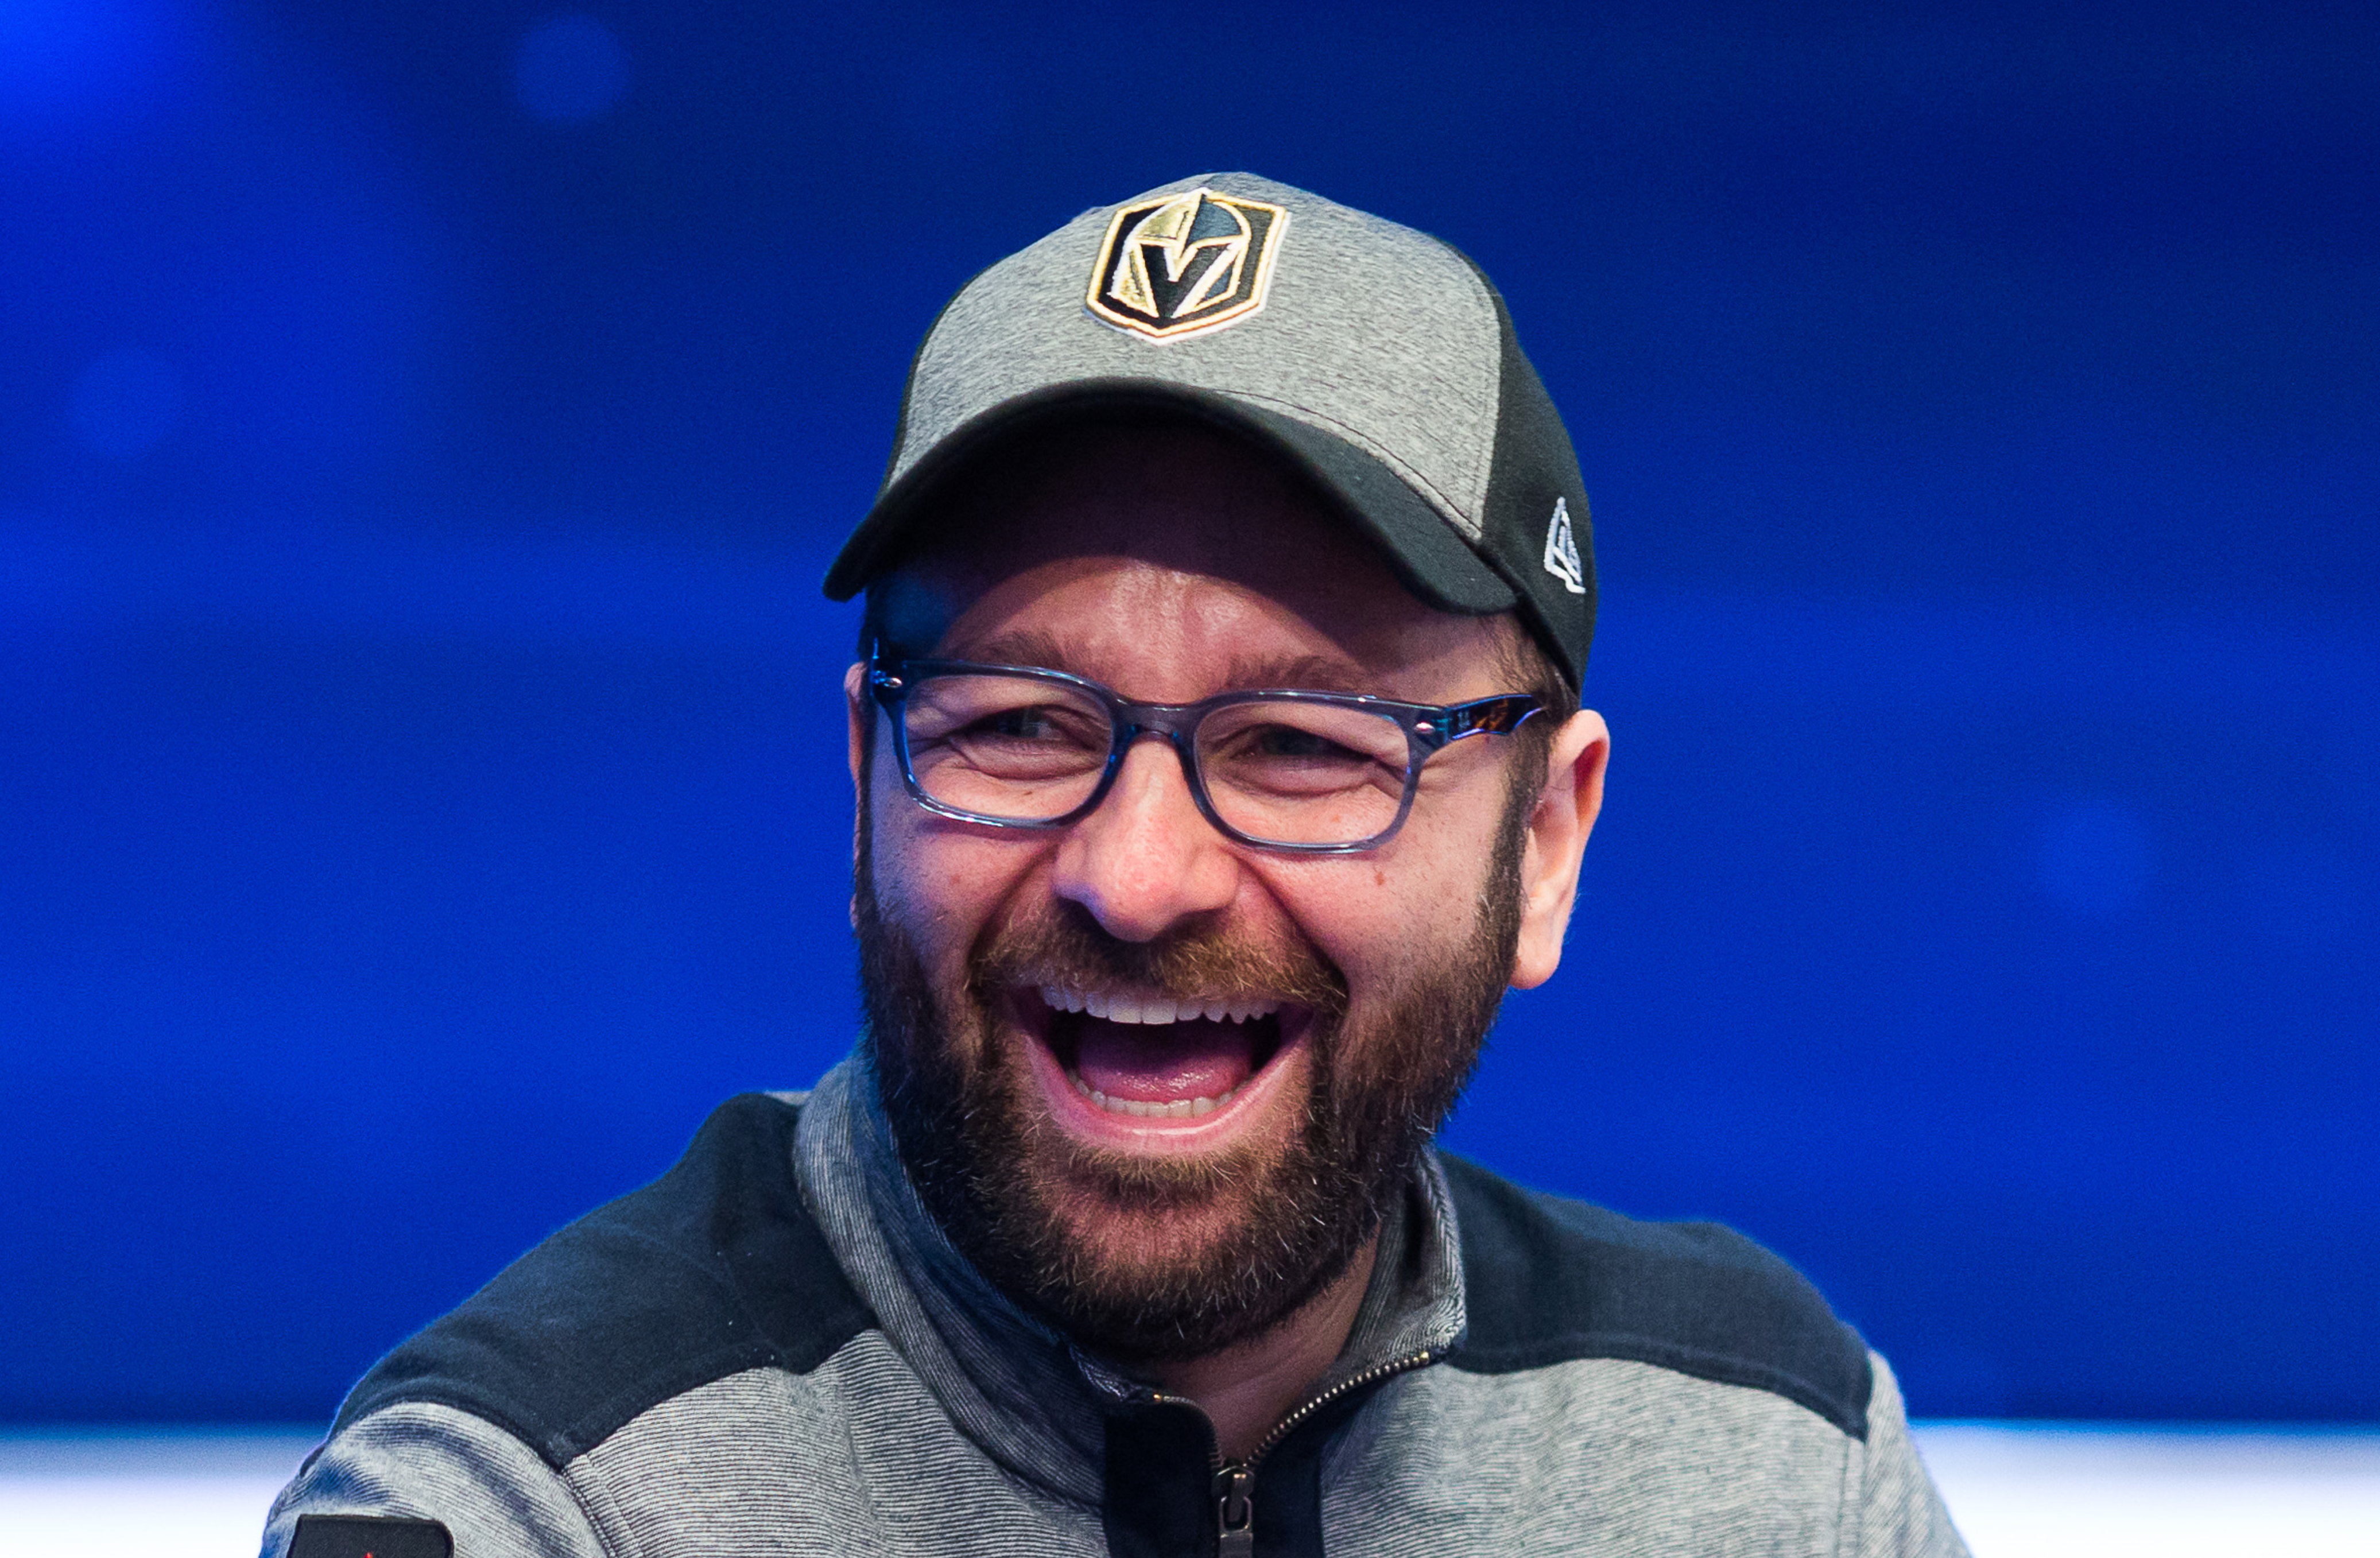 Riveting Colossus contest rounds off WSOPE: ElKy wins gold; Daniel Negreanu crowned WSOP POY